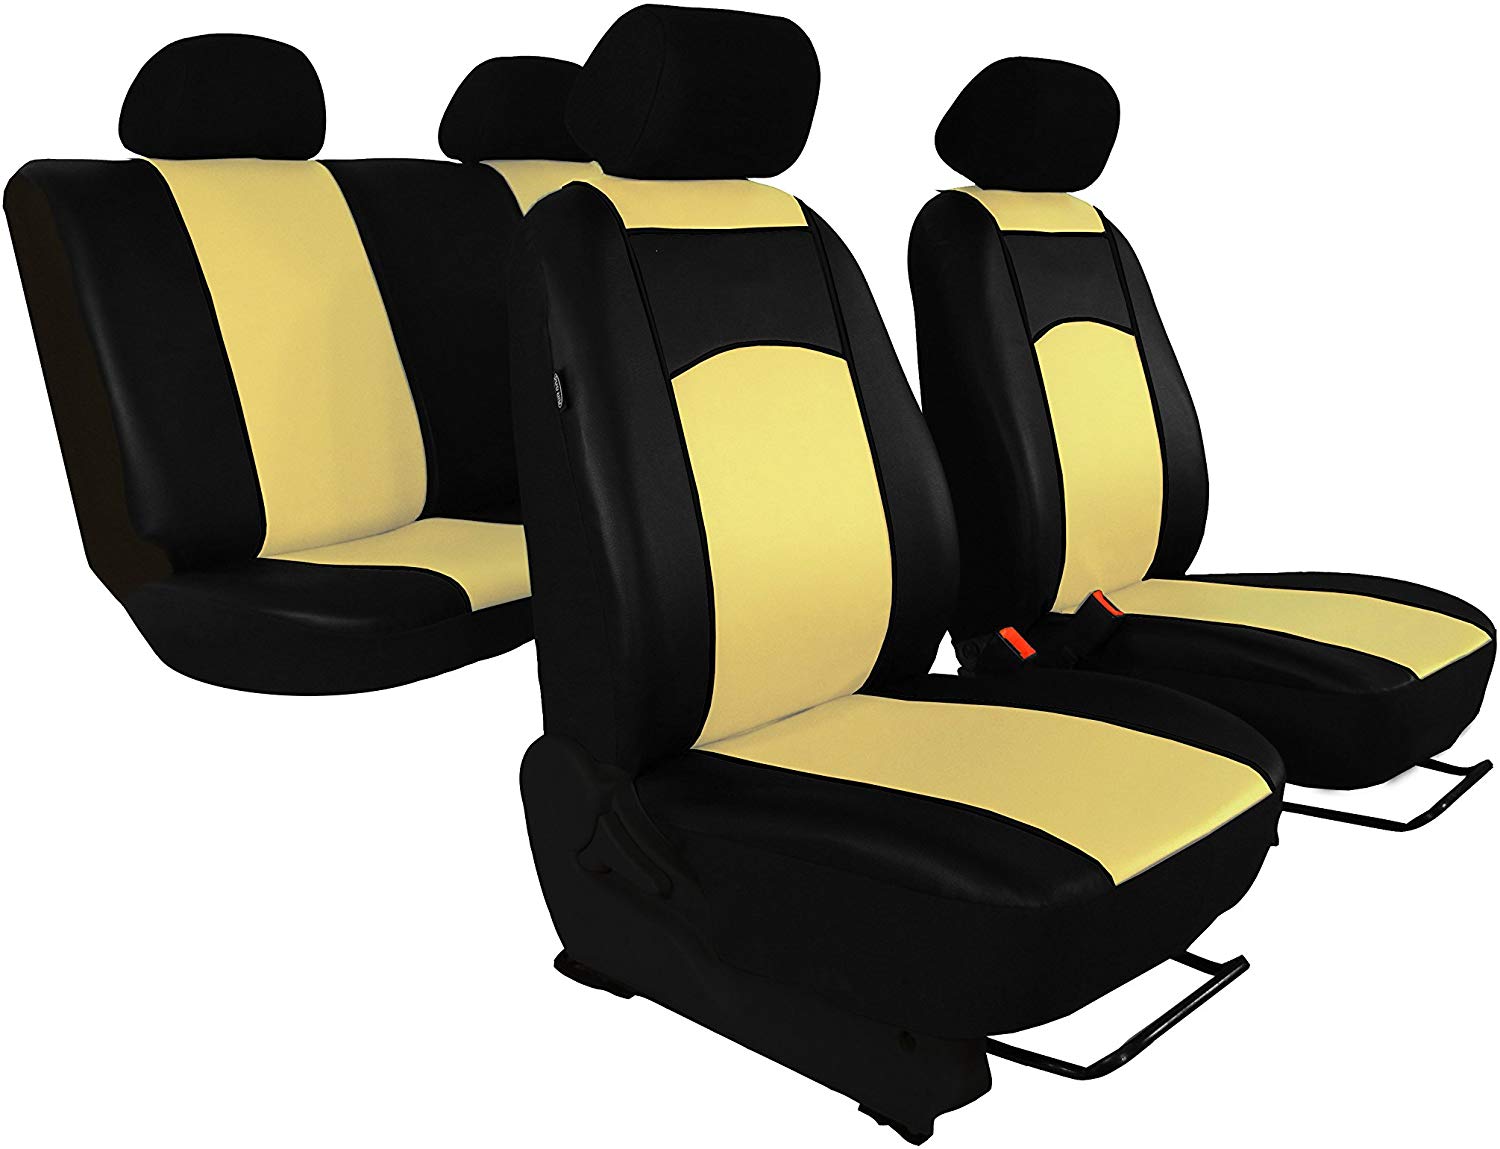 Tailor Made Heavy Leather Look Seat Cover Set for Hyundai IX35 2010 > 2015 high-quality 7 Colours